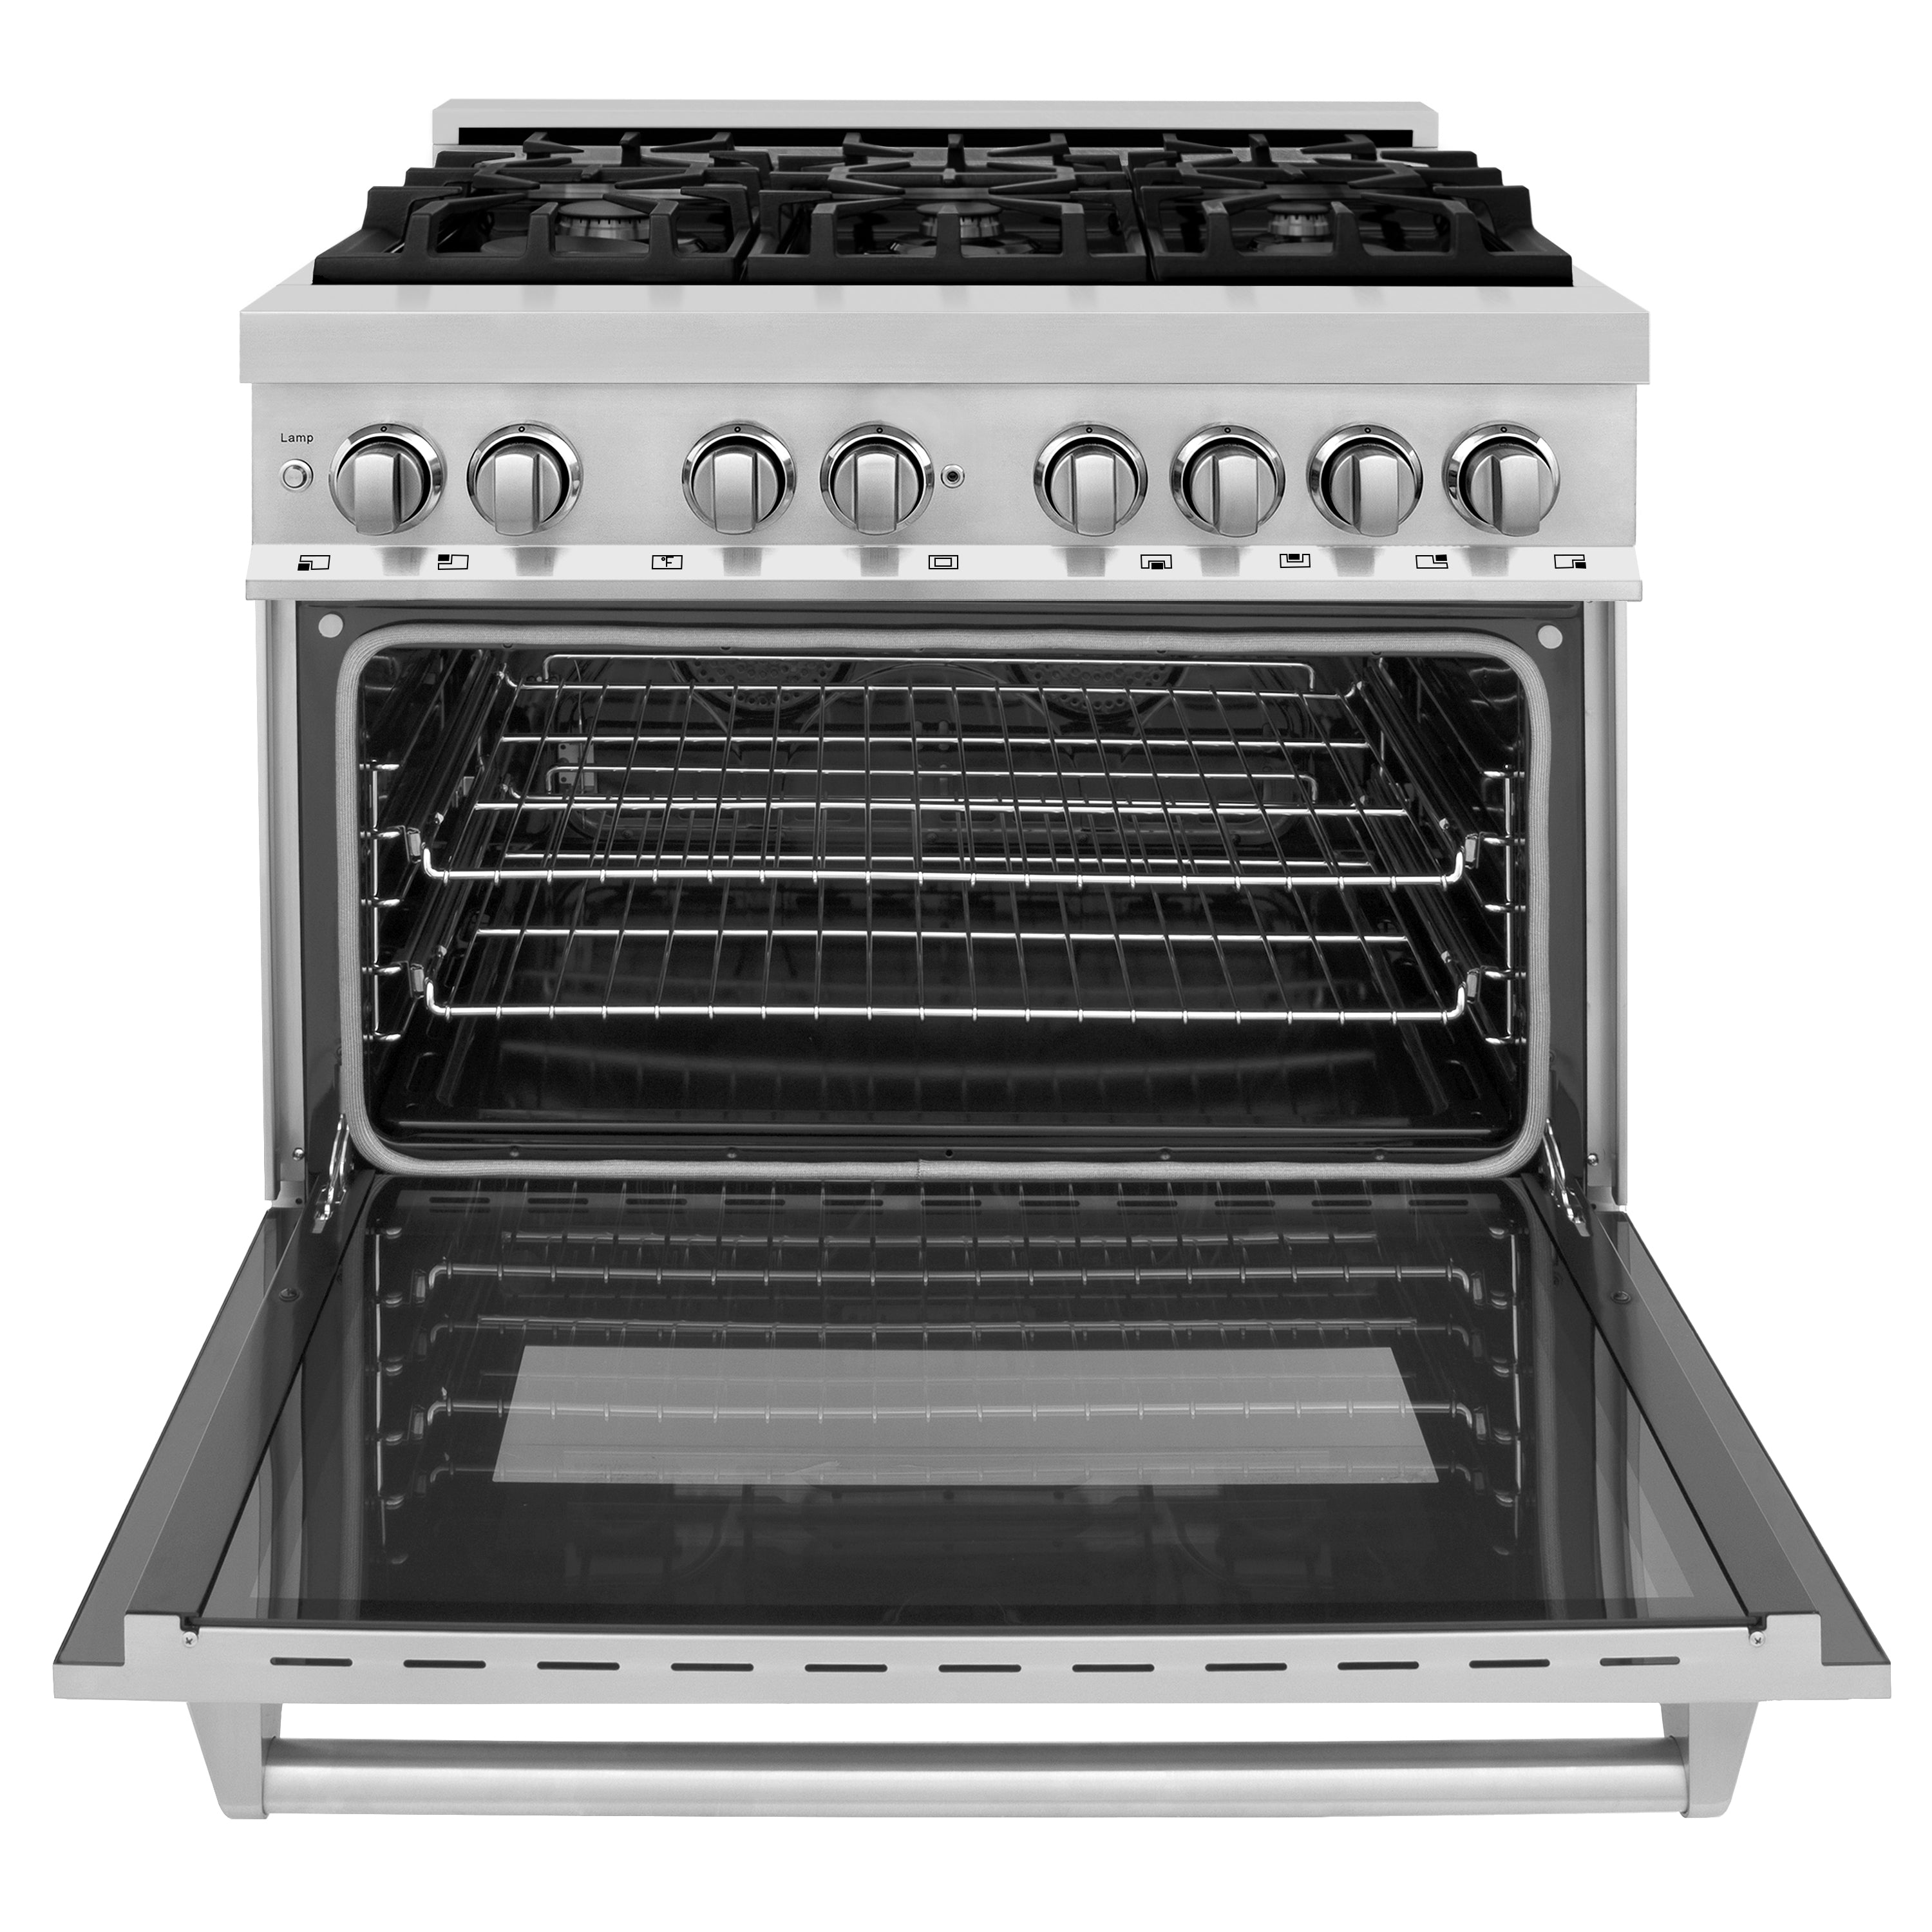 ZLINE 36" 4.6 cu. ft. Dual Fuel Range with Gas Stove and Electric Oven in Stainless Steel (RA36)